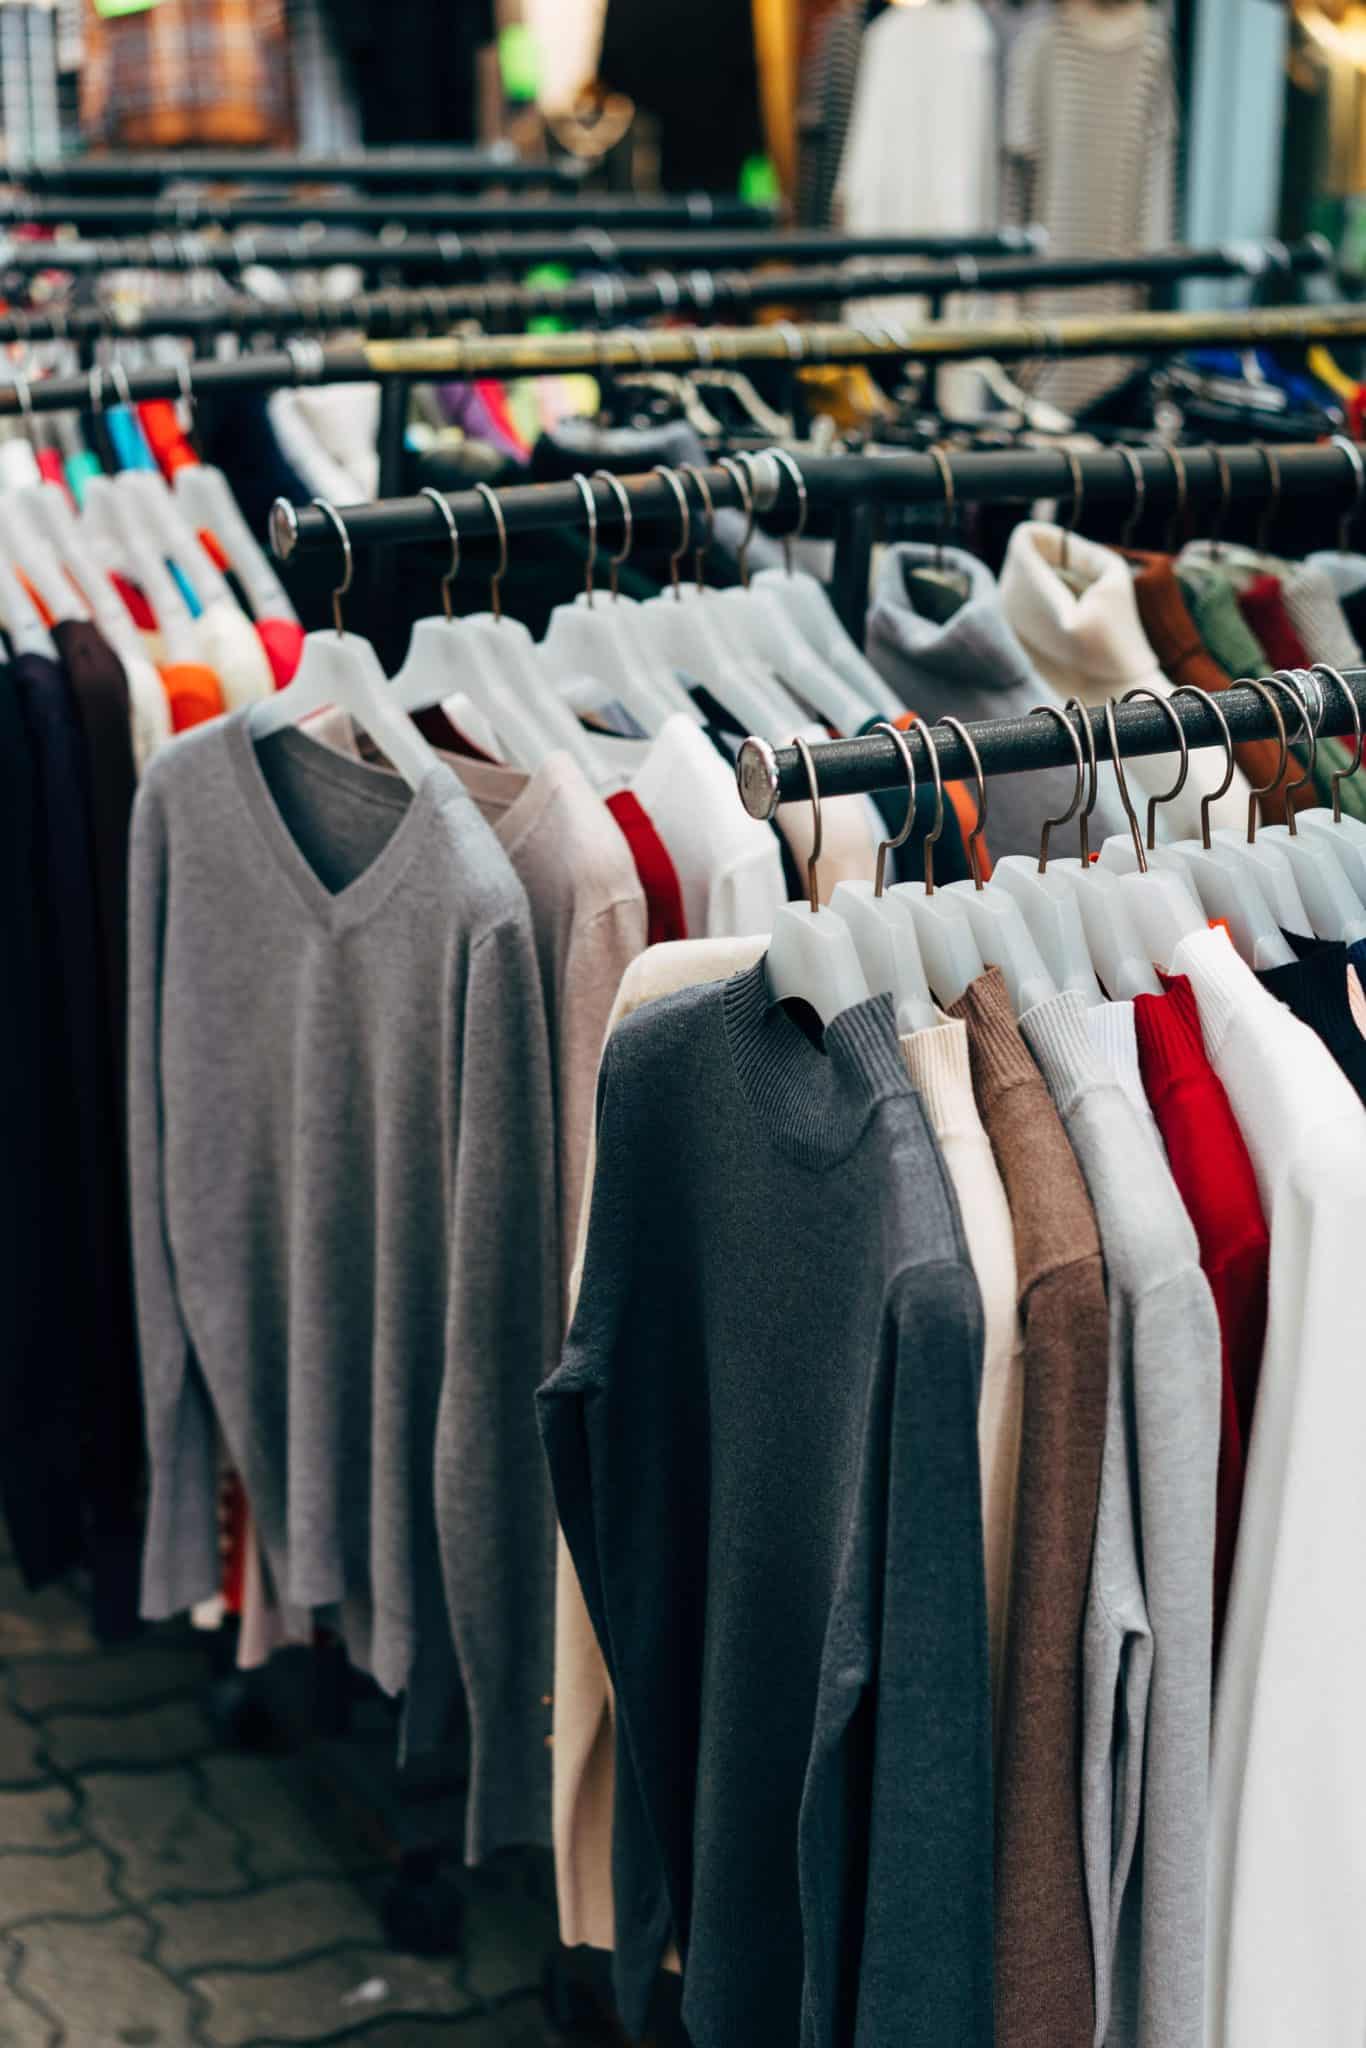 inventory management for retail clothing store